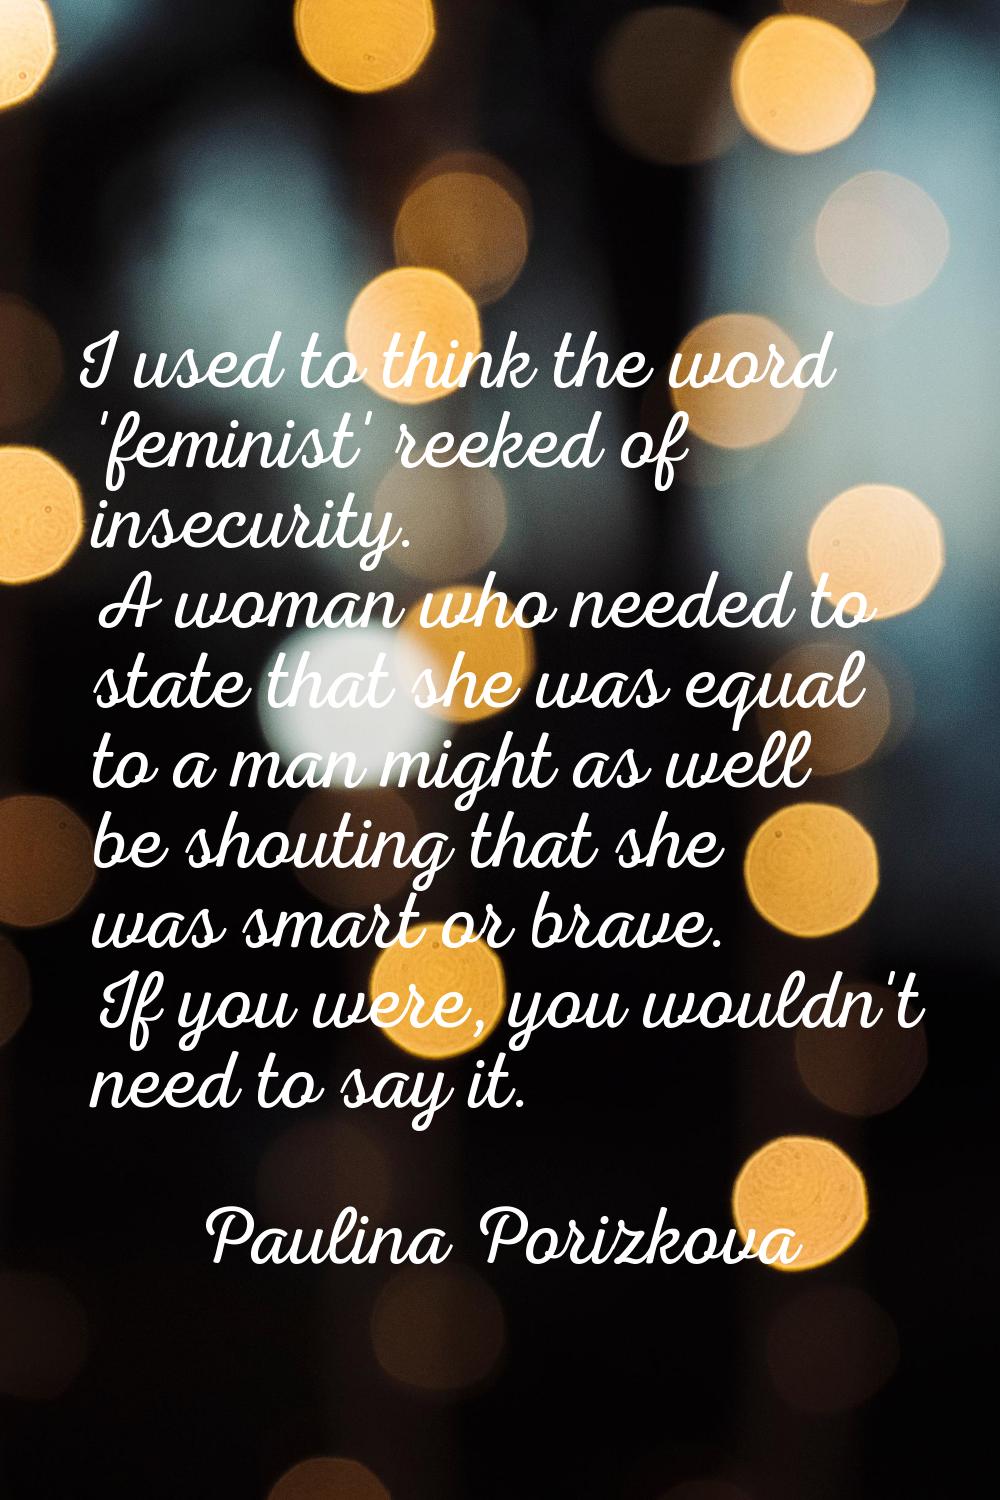 I used to think the word 'feminist' reeked of insecurity. A woman who needed to state that she was 